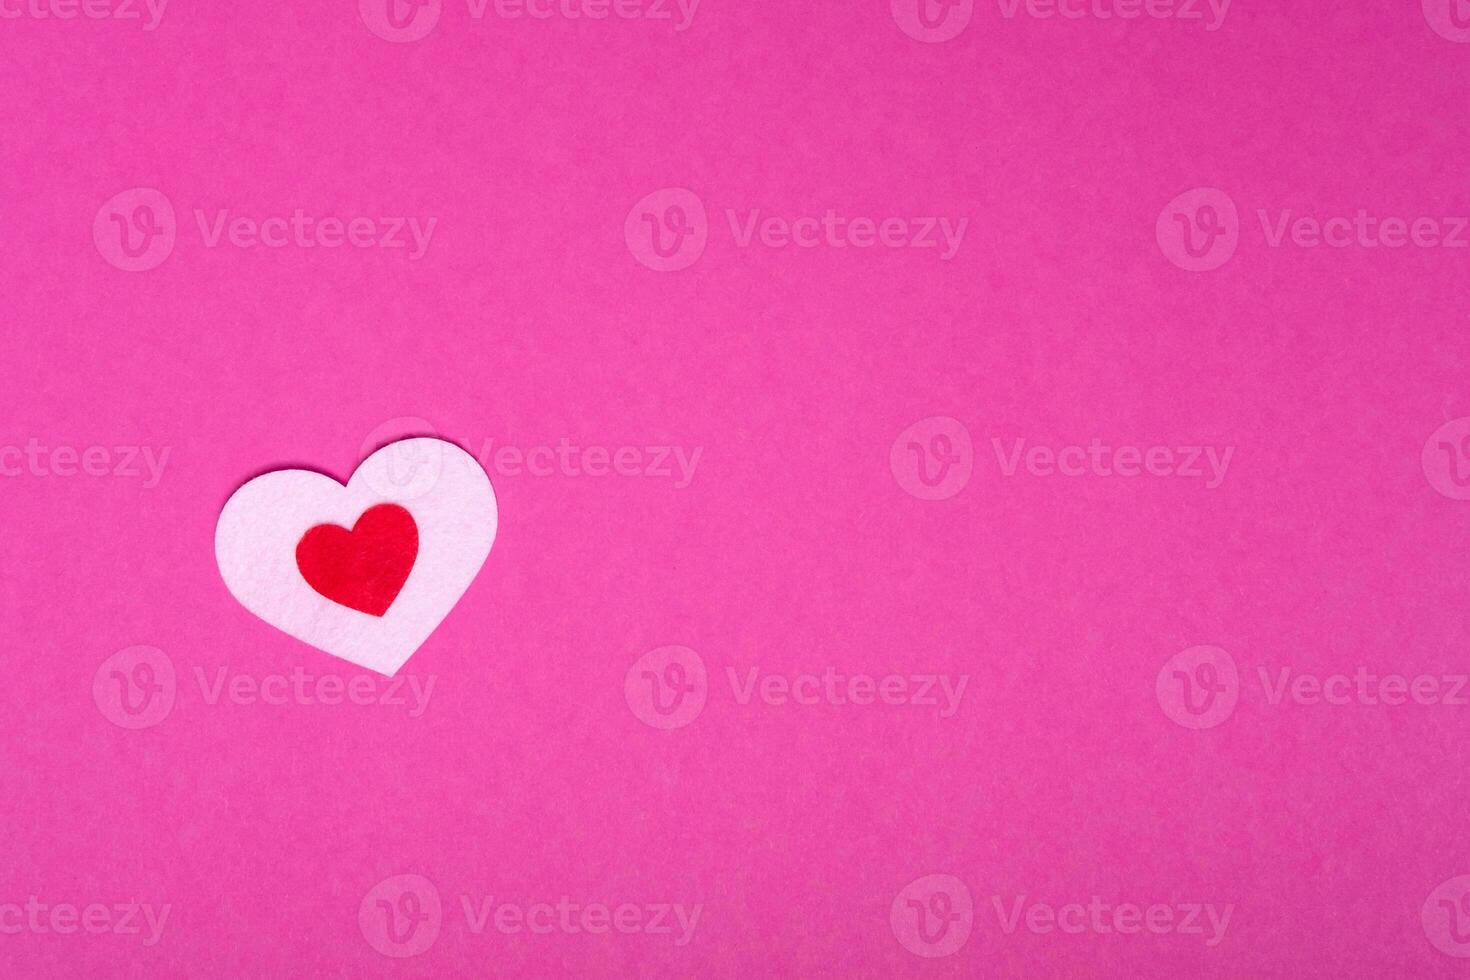 heart on a pink background for a greeting card or banner for Valentine's Day, copy space photo